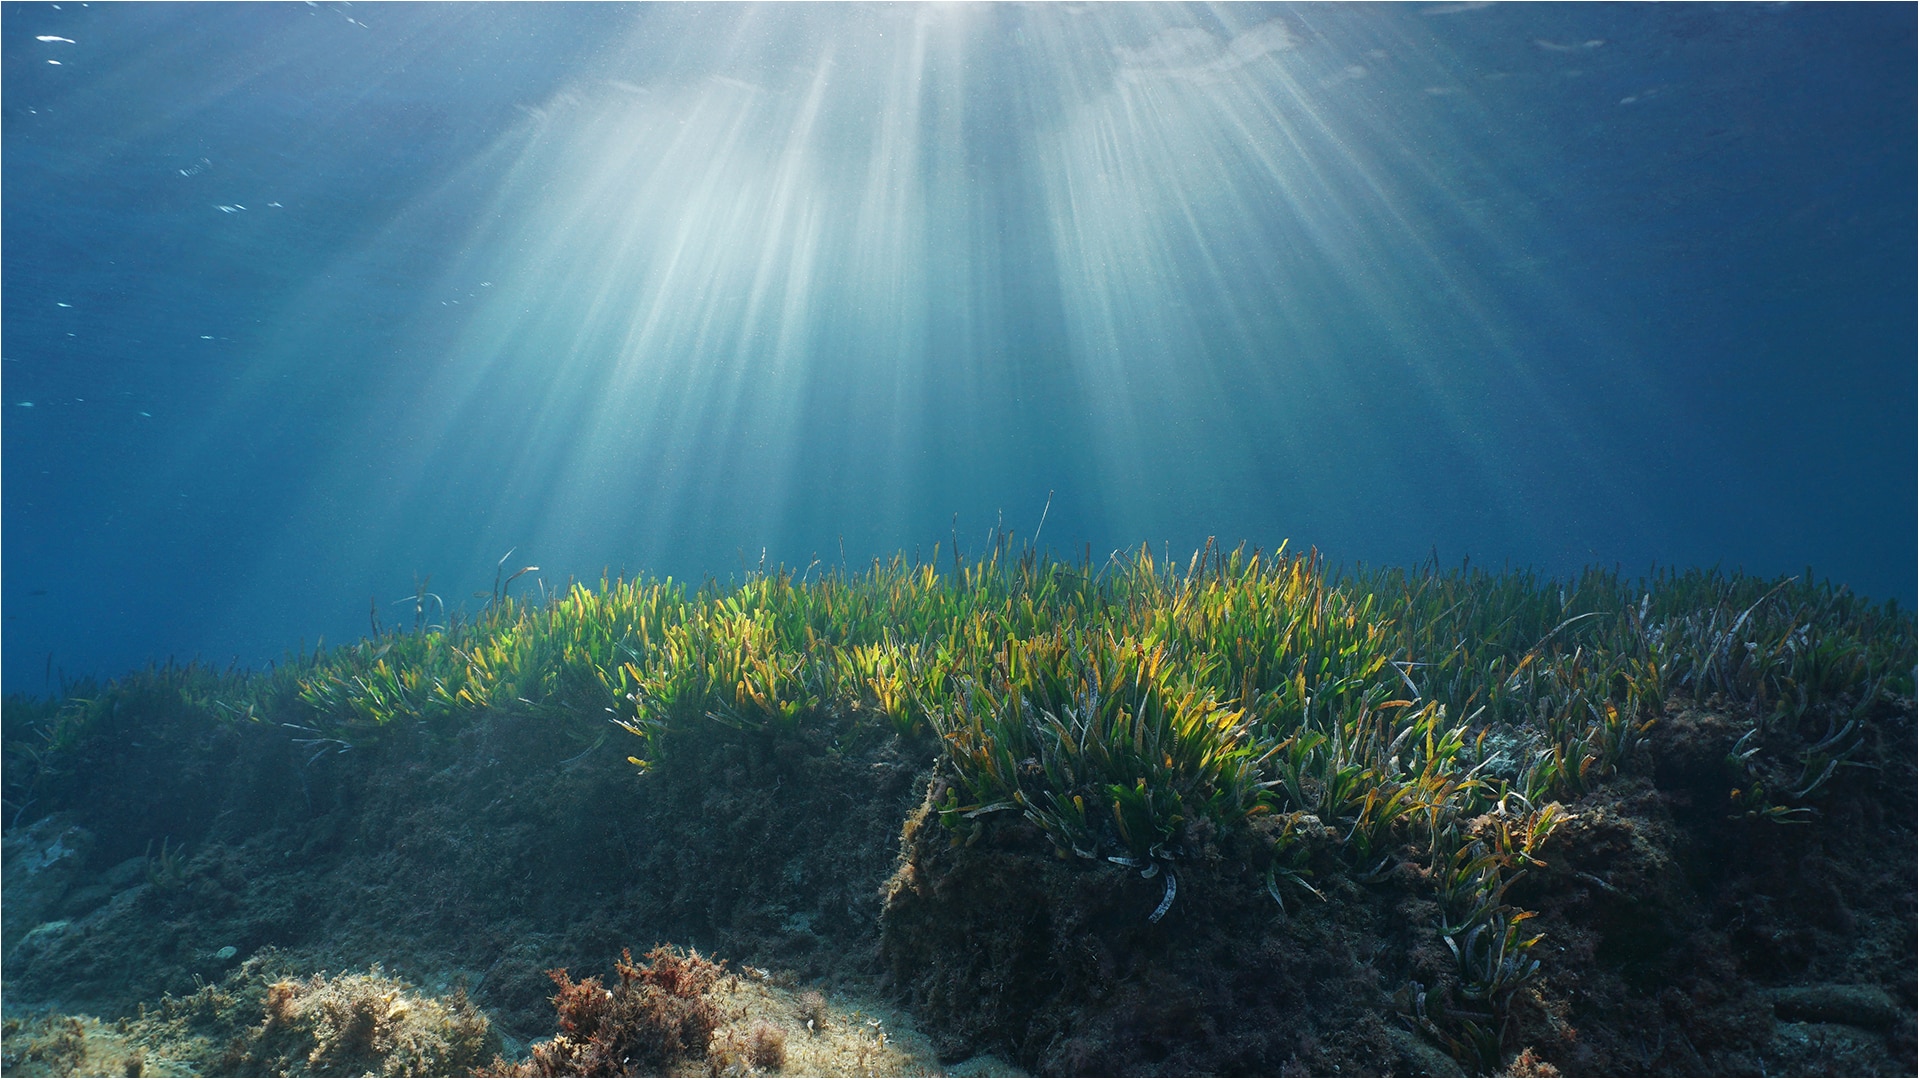 Seagrass and sun beams